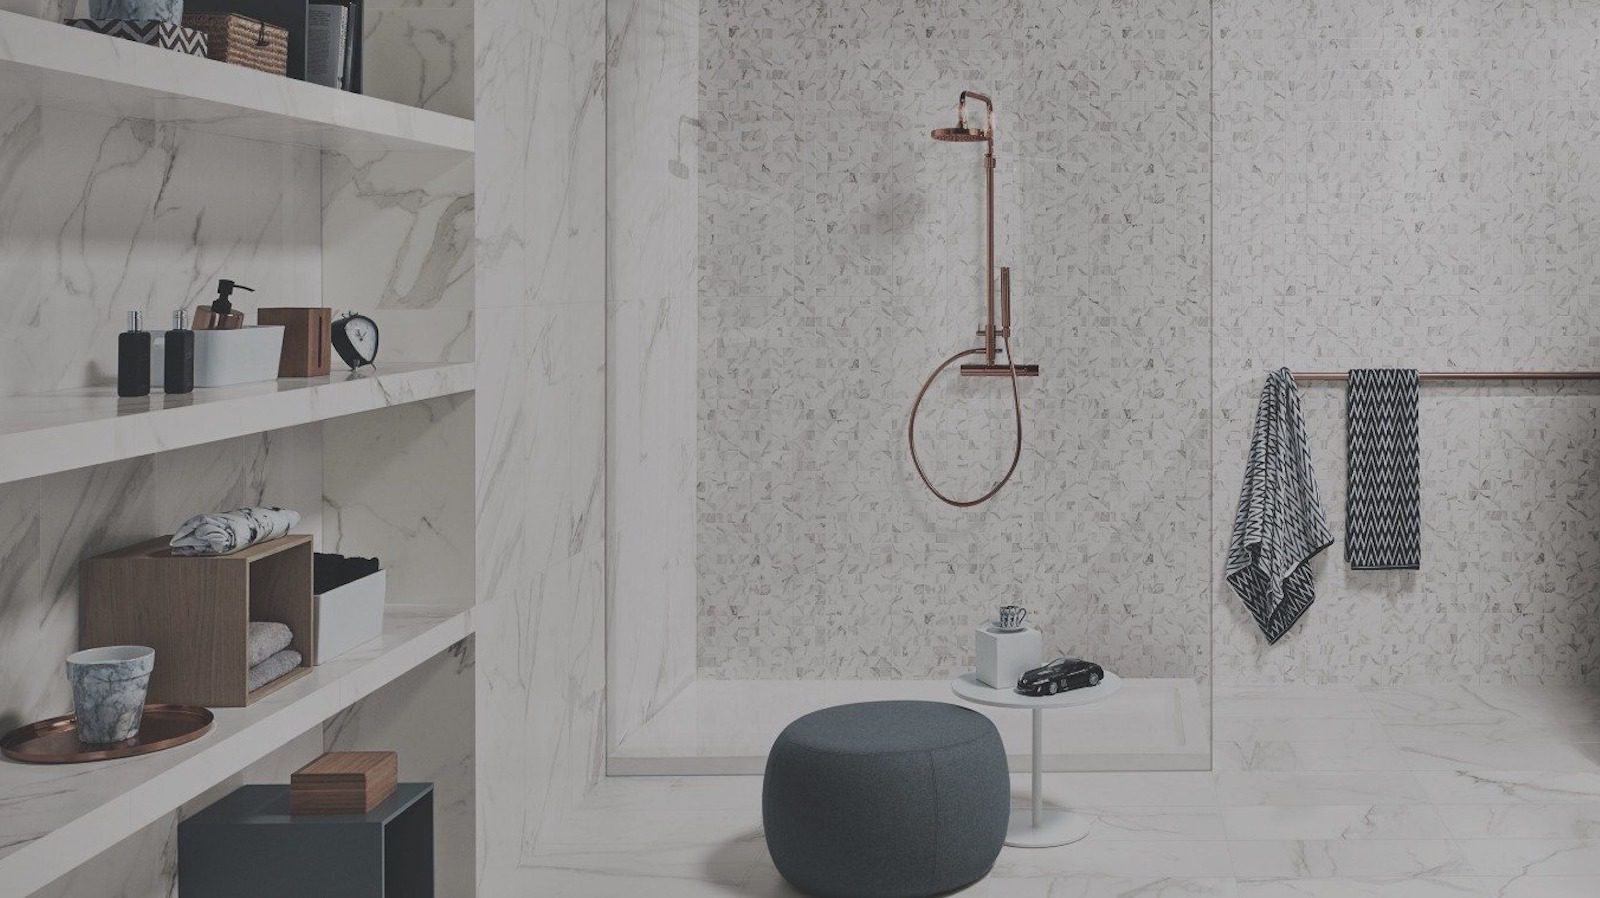 Beautiful bathroom with marble floor used to illustrate our Magento project page for our client Lanctot.